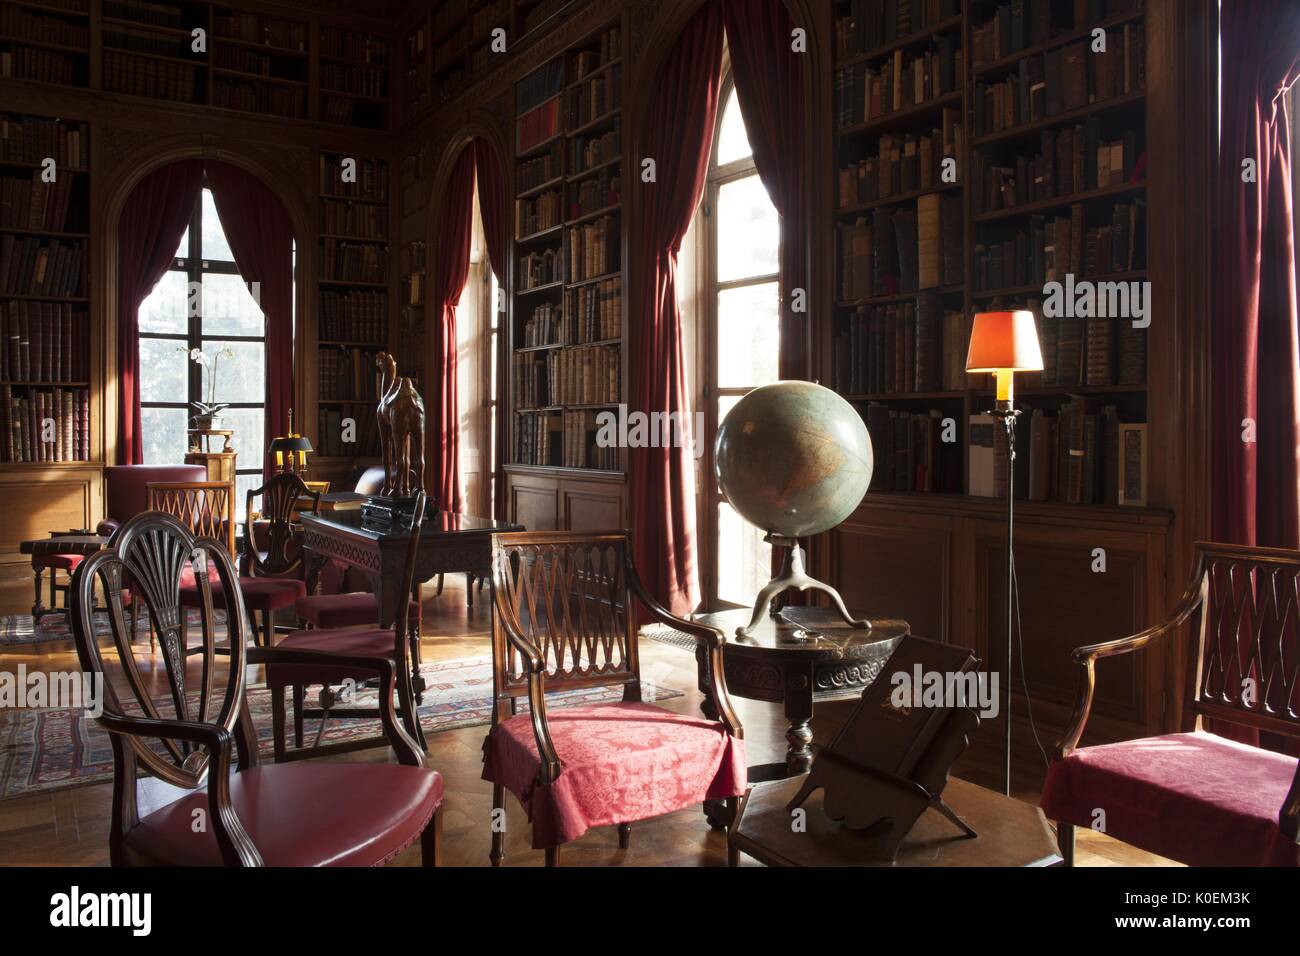 A decorated sitting room, there are a lot of wooden chairs and built-in bookshelves line the walls along with floor to ceiling windows, 2014. Courtesy Eric Chen. Stock Photo